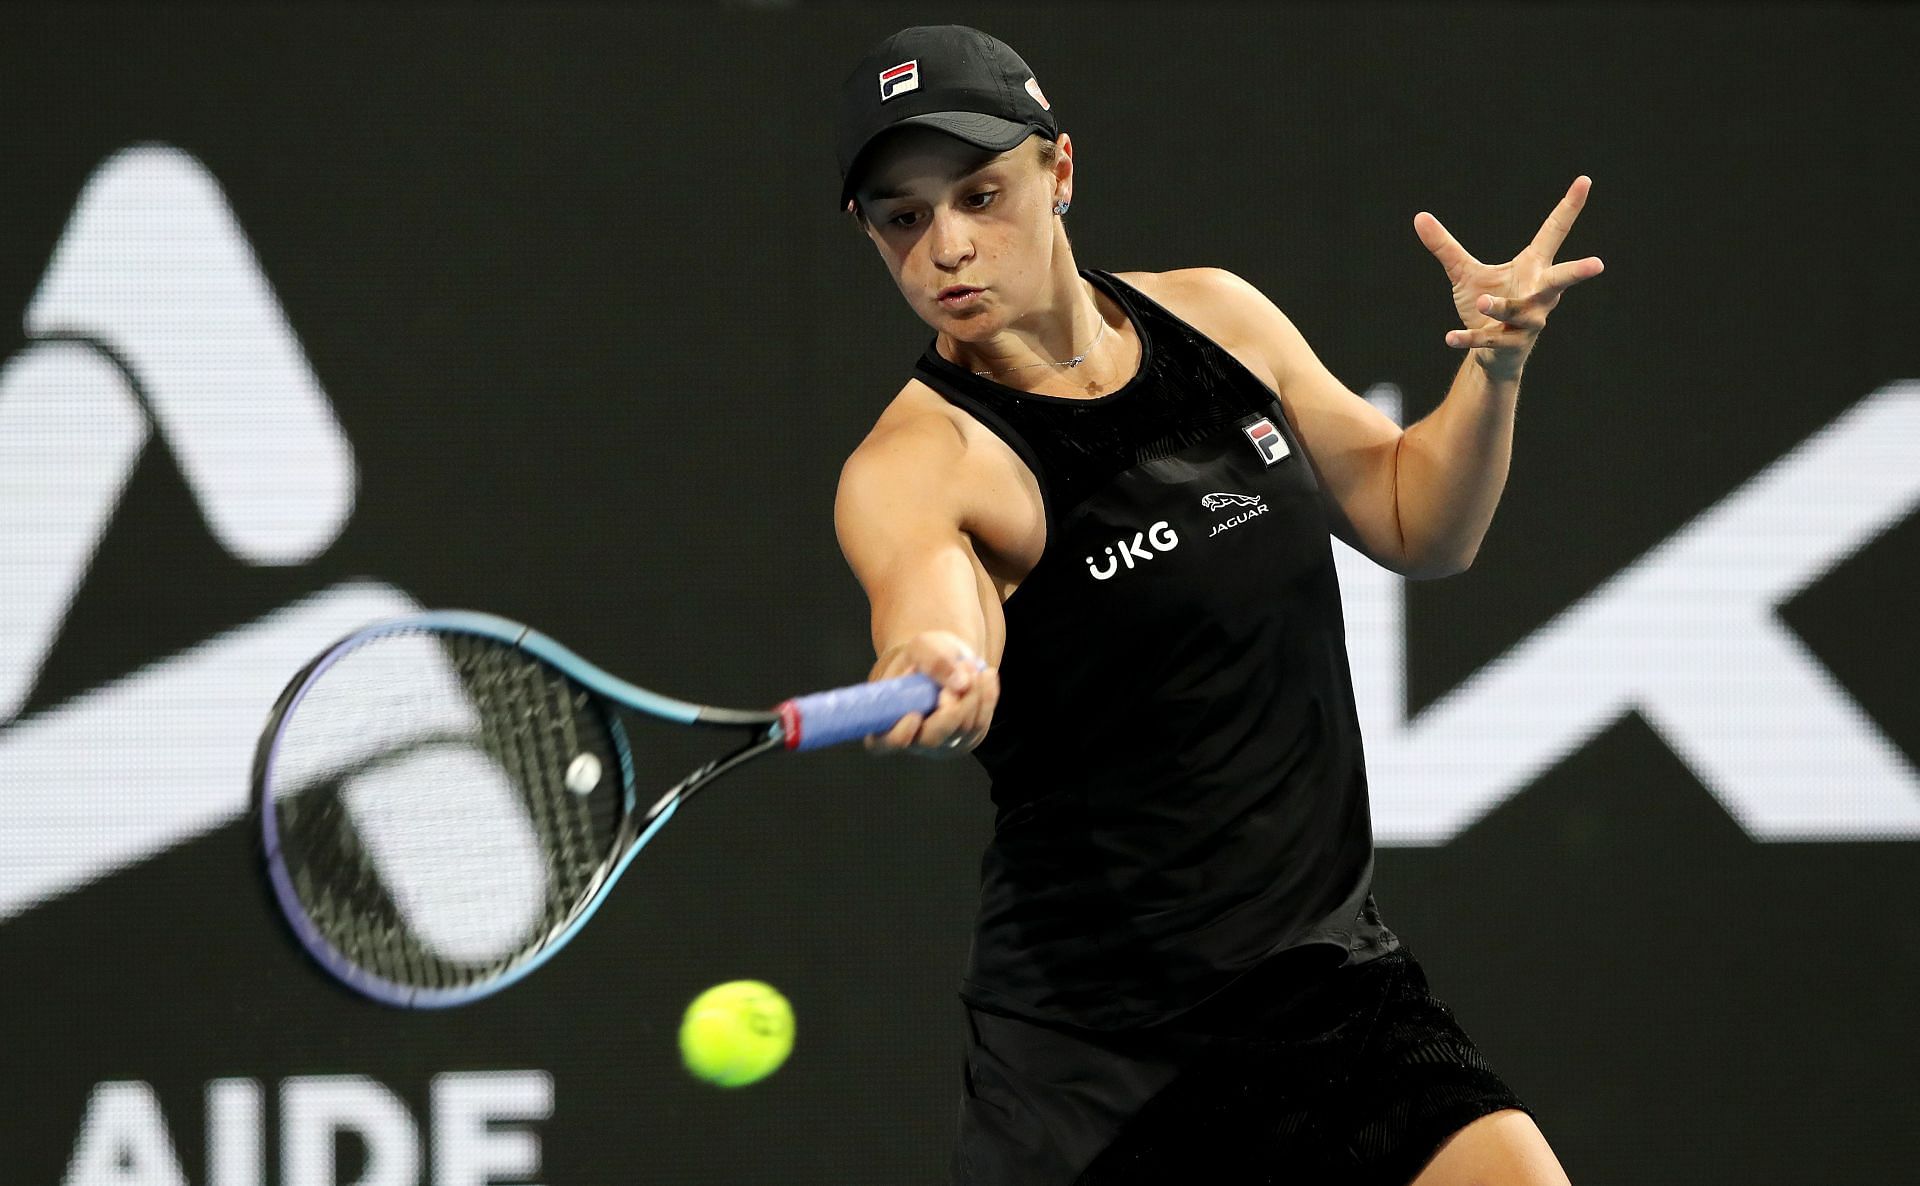 Ashleigh Barty at the Adelaide International 2022